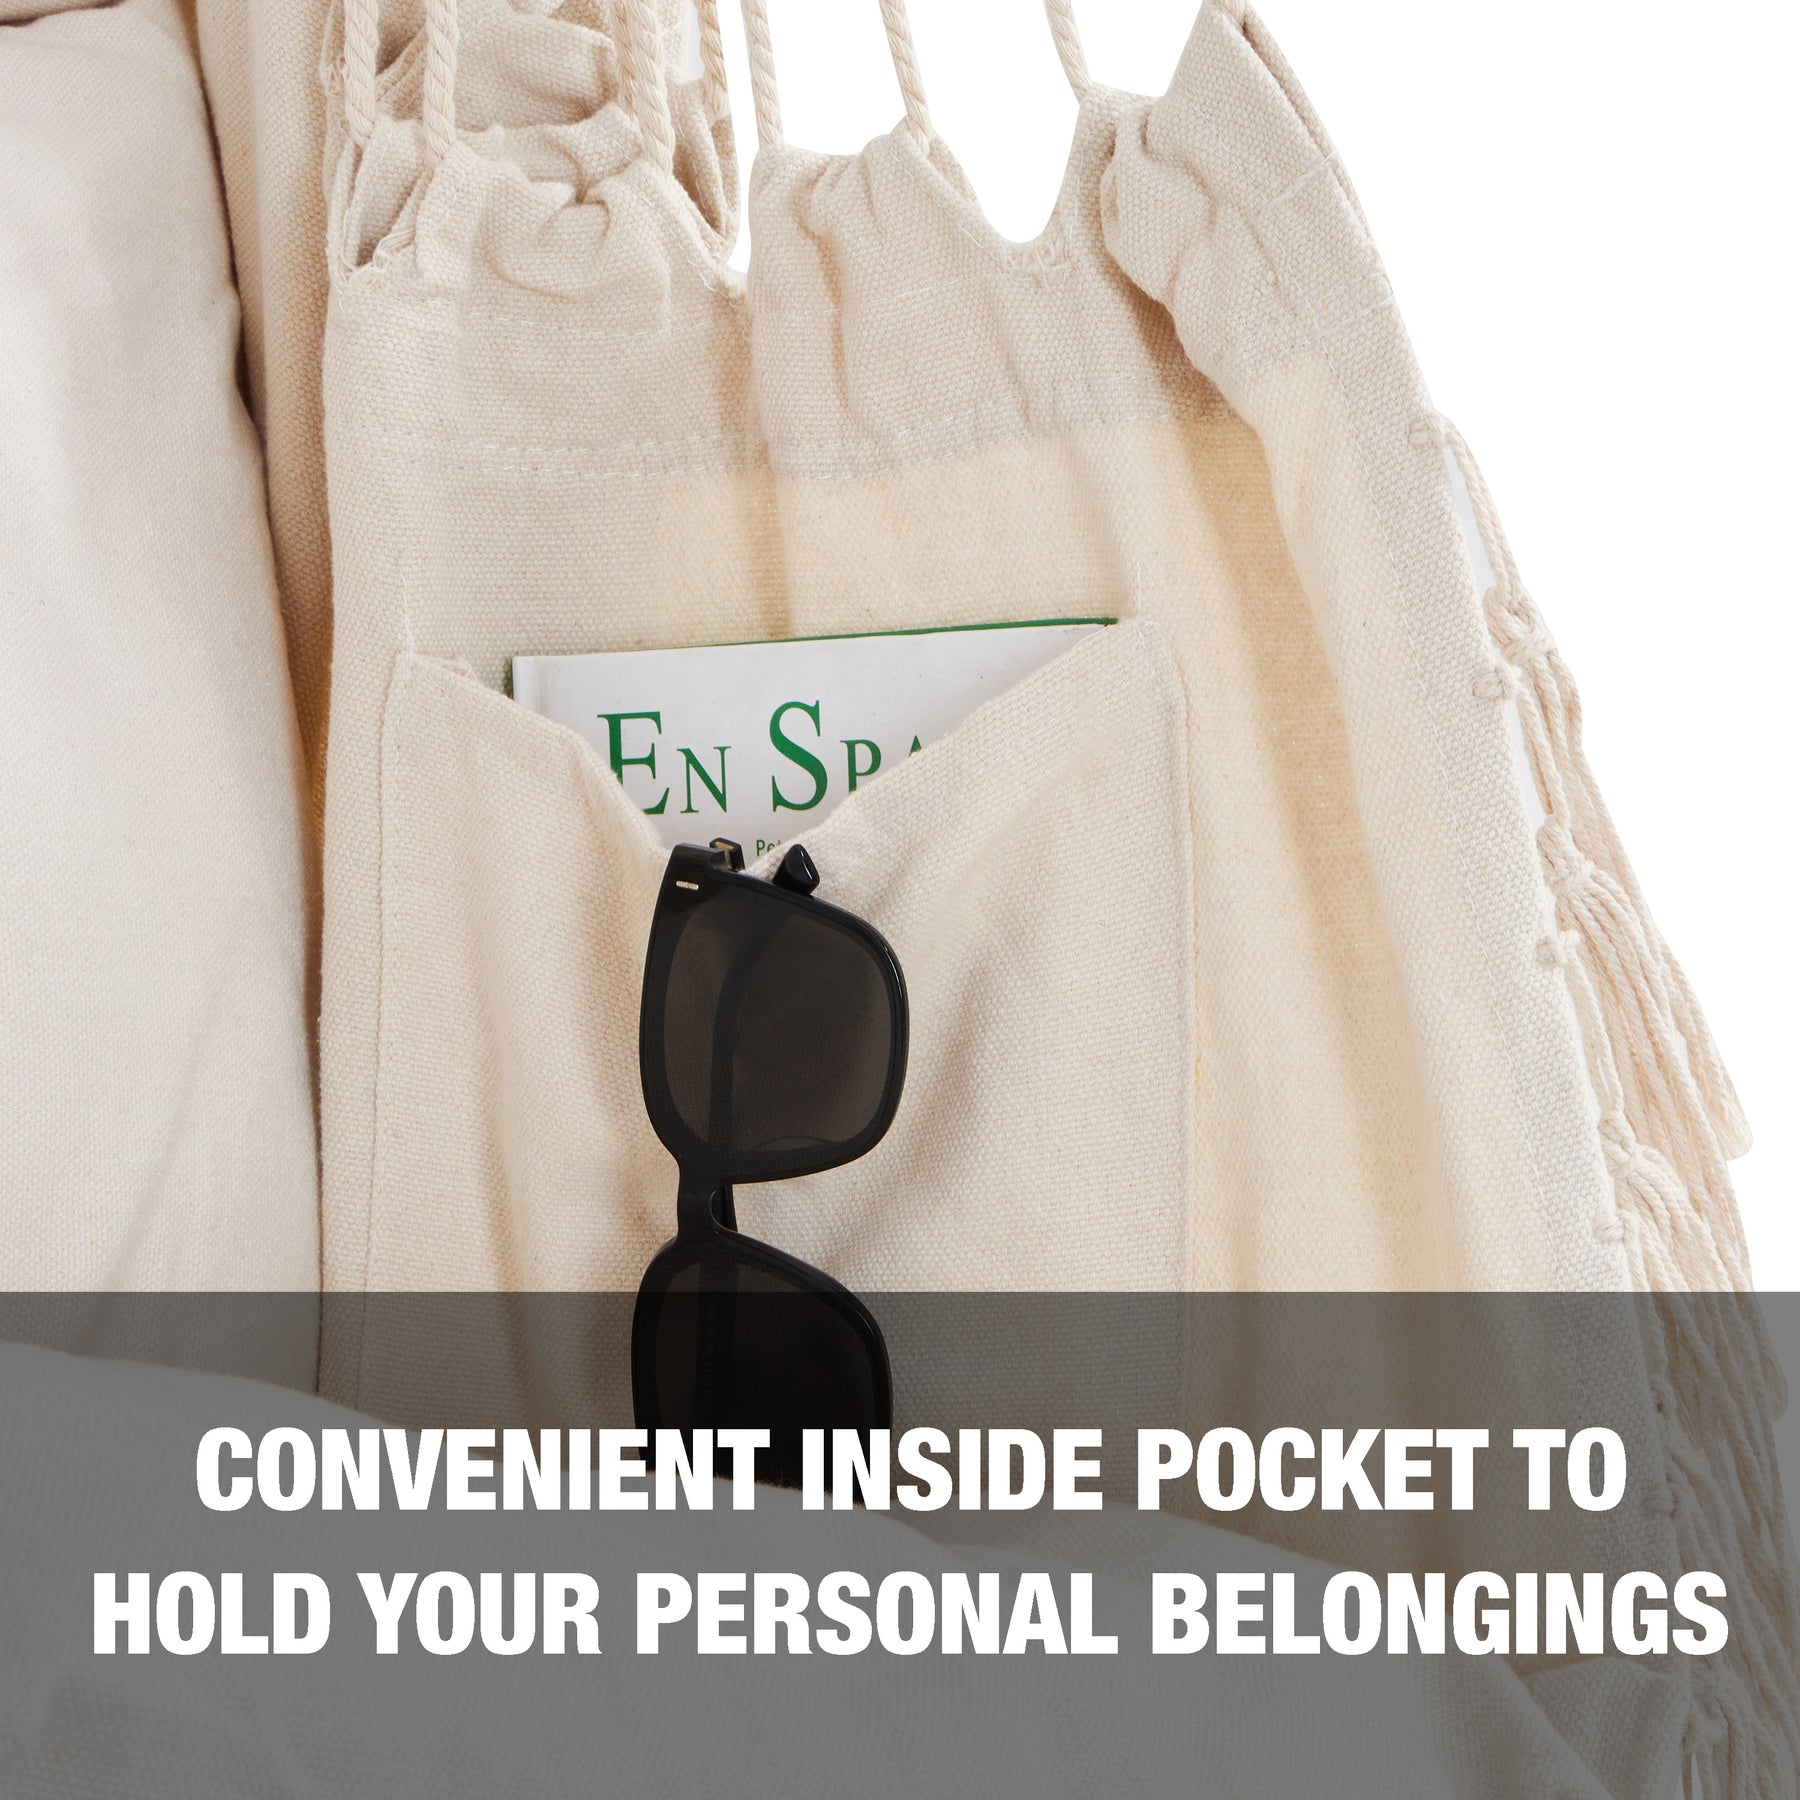 Convenient inside pocket to hold your personal belongings.